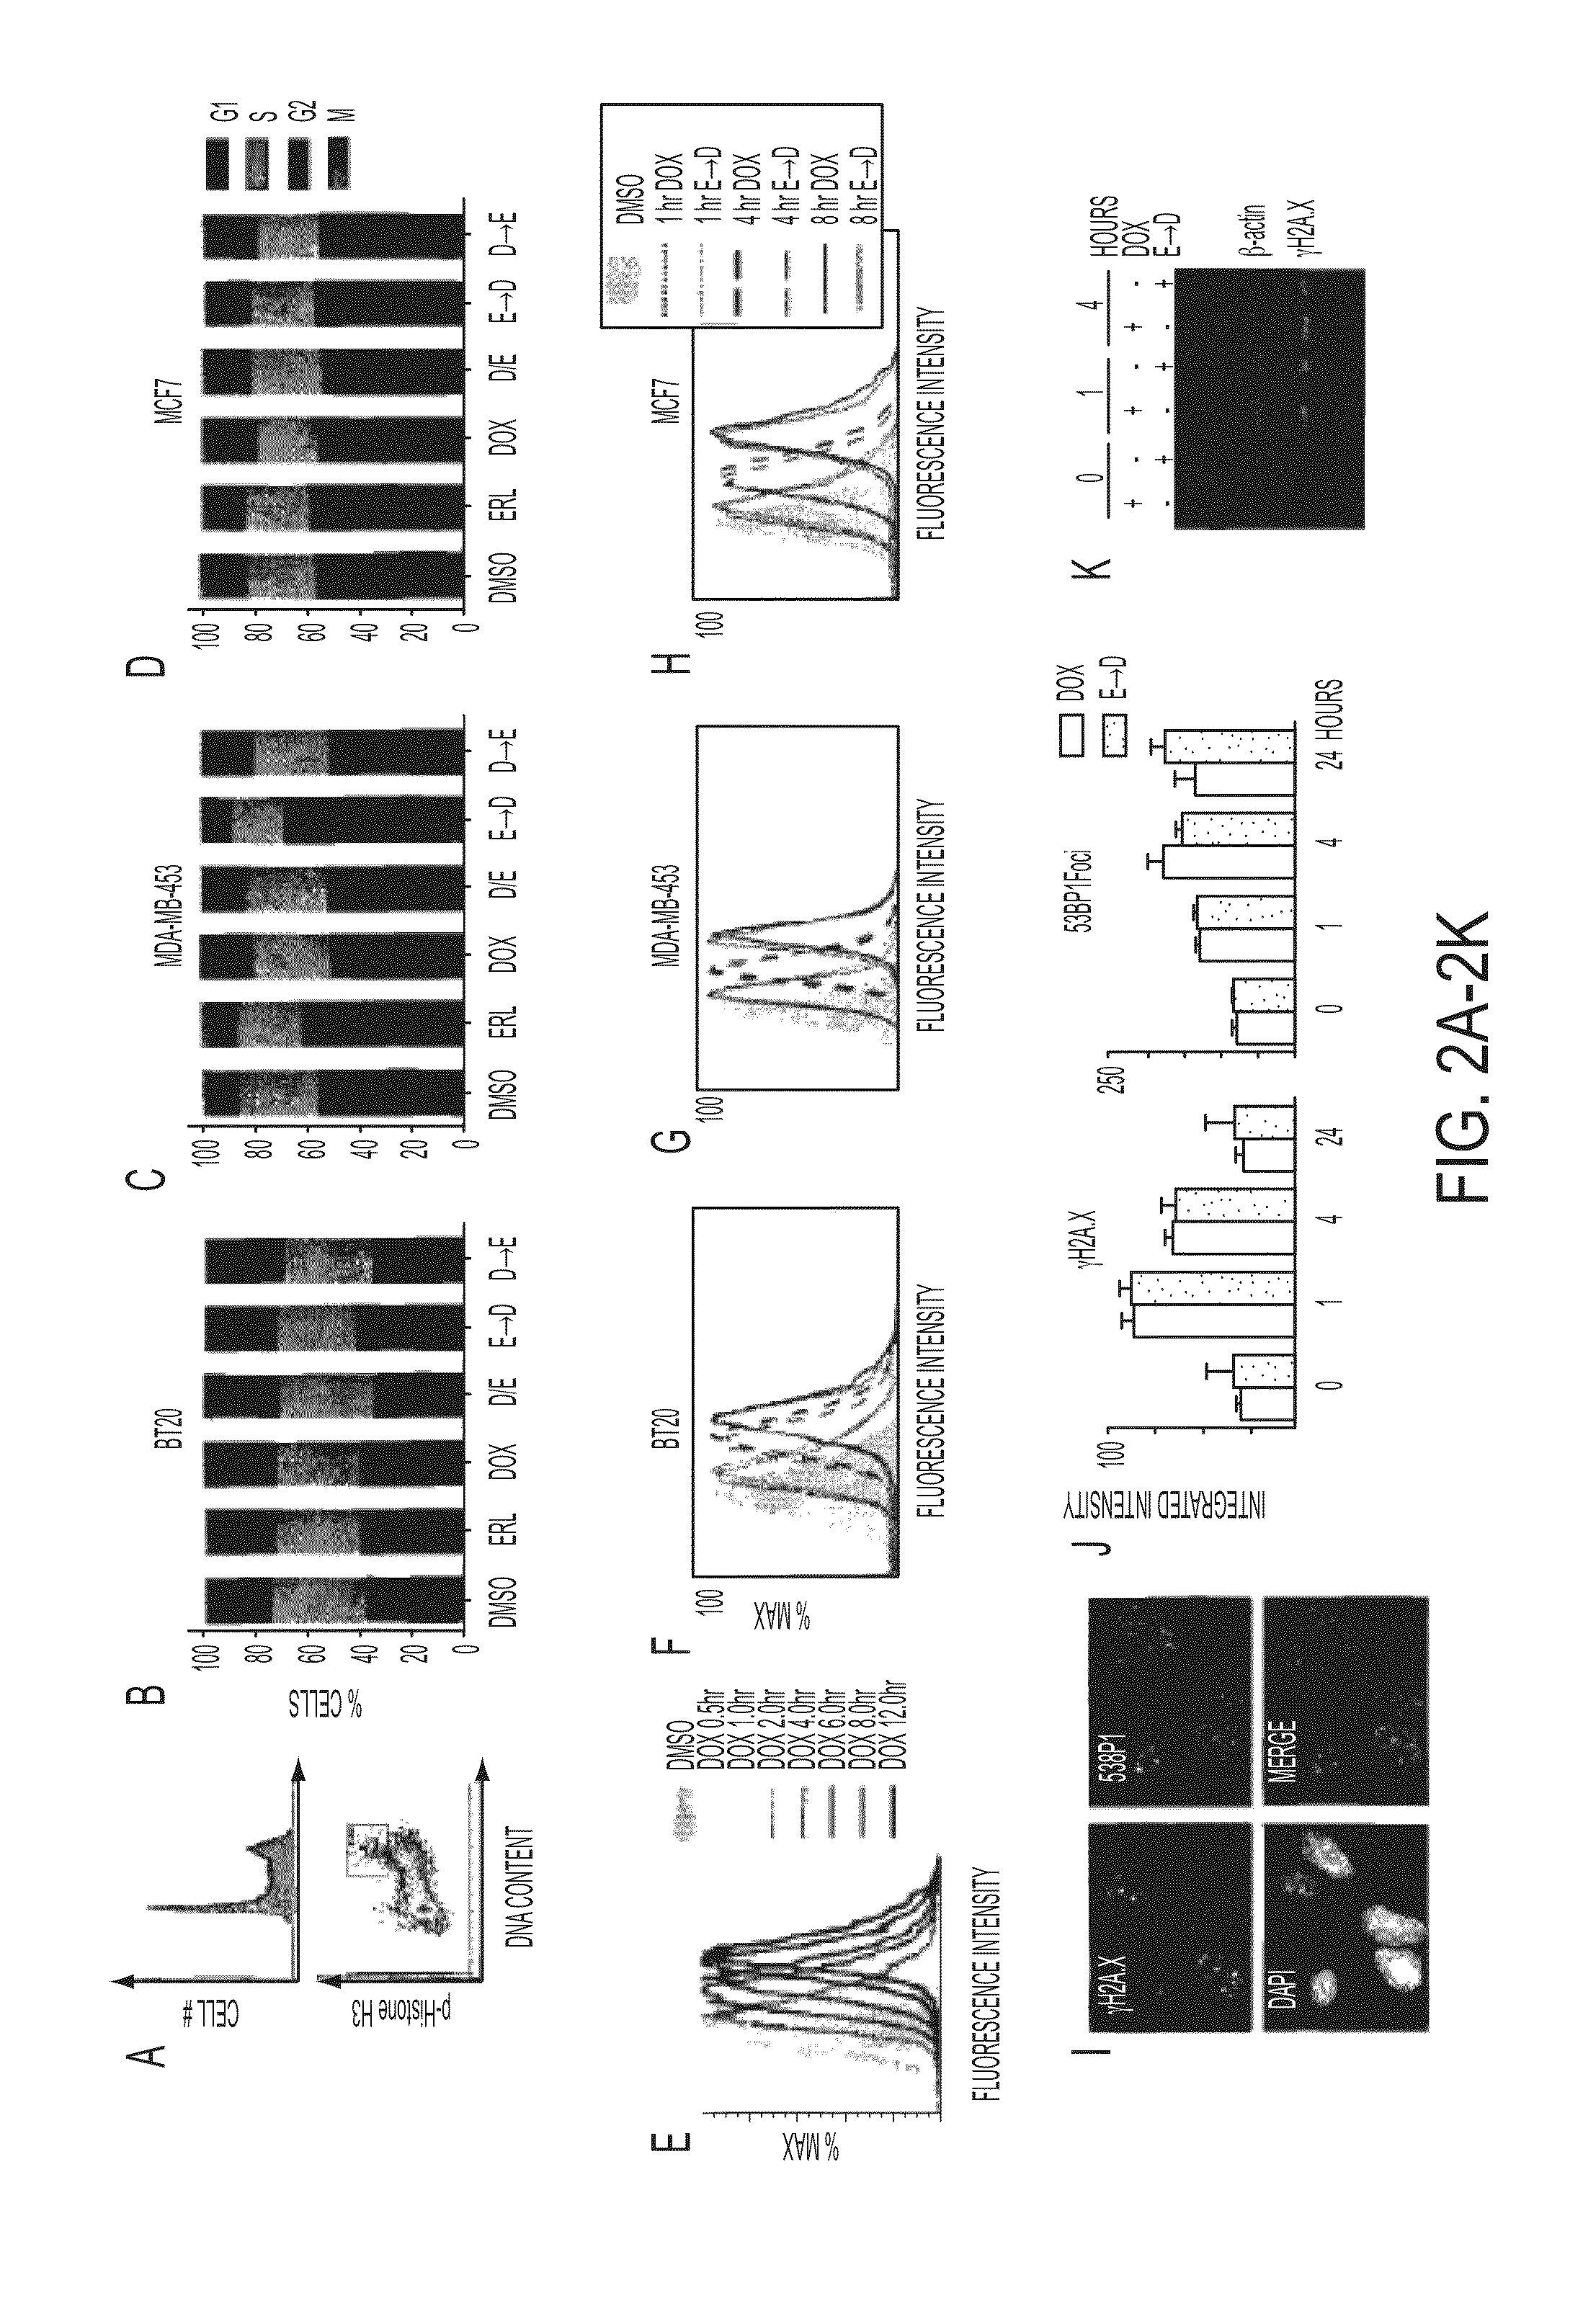 Compositions and methods of treatment of drug resistant cancers